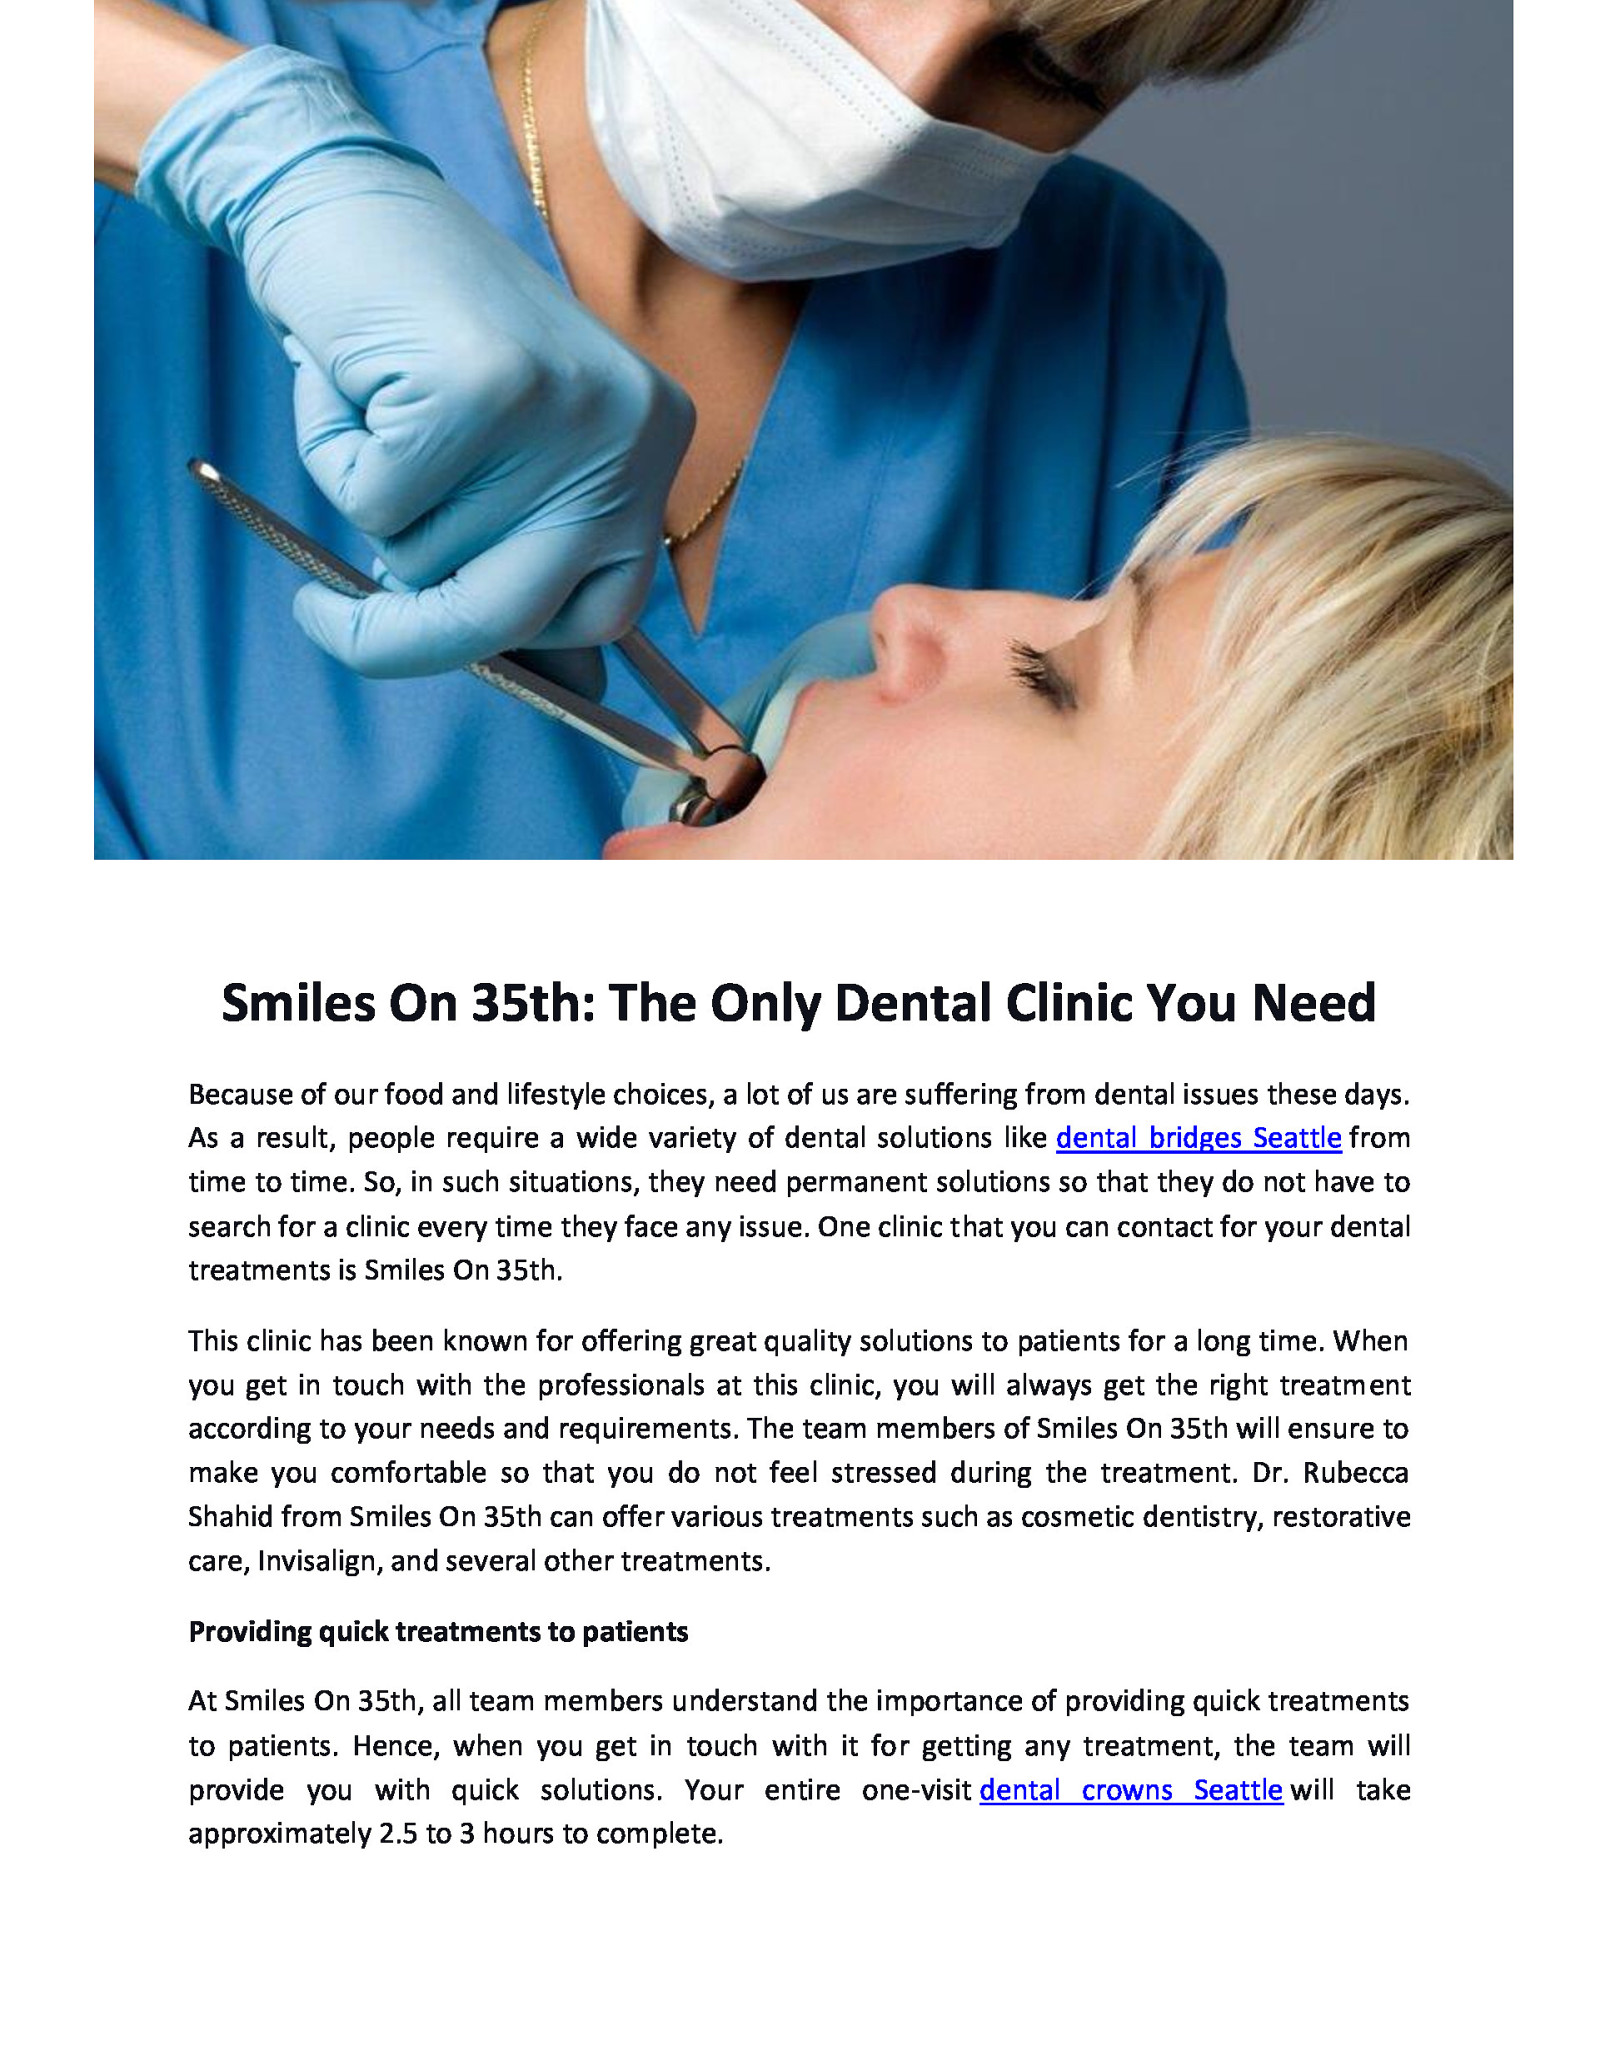 Smiles On 35th: The Only Dental Clinic You Need by Smiles On 35th